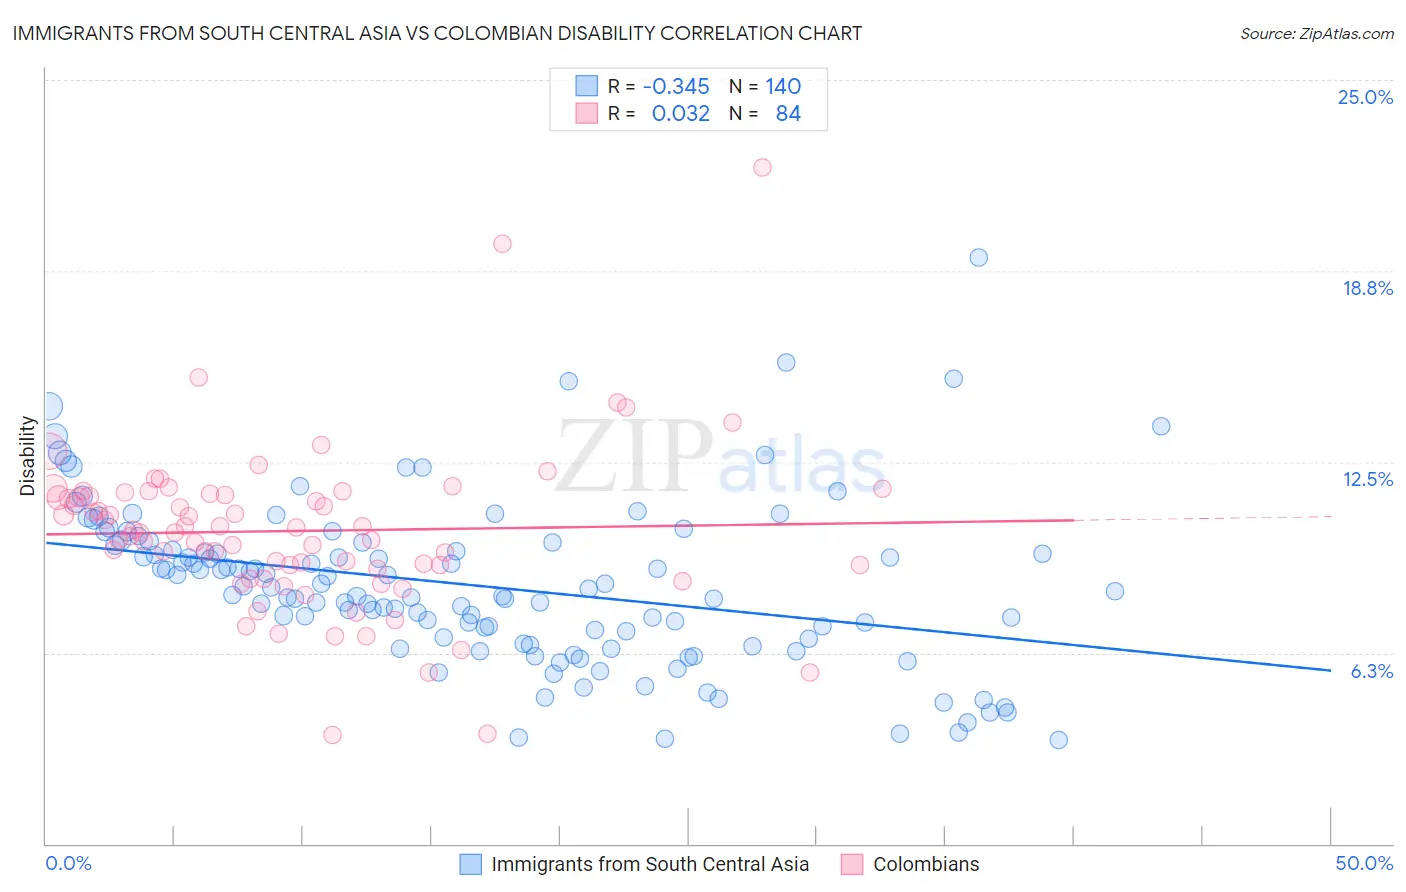 Immigrants from South Central Asia vs Colombian Disability